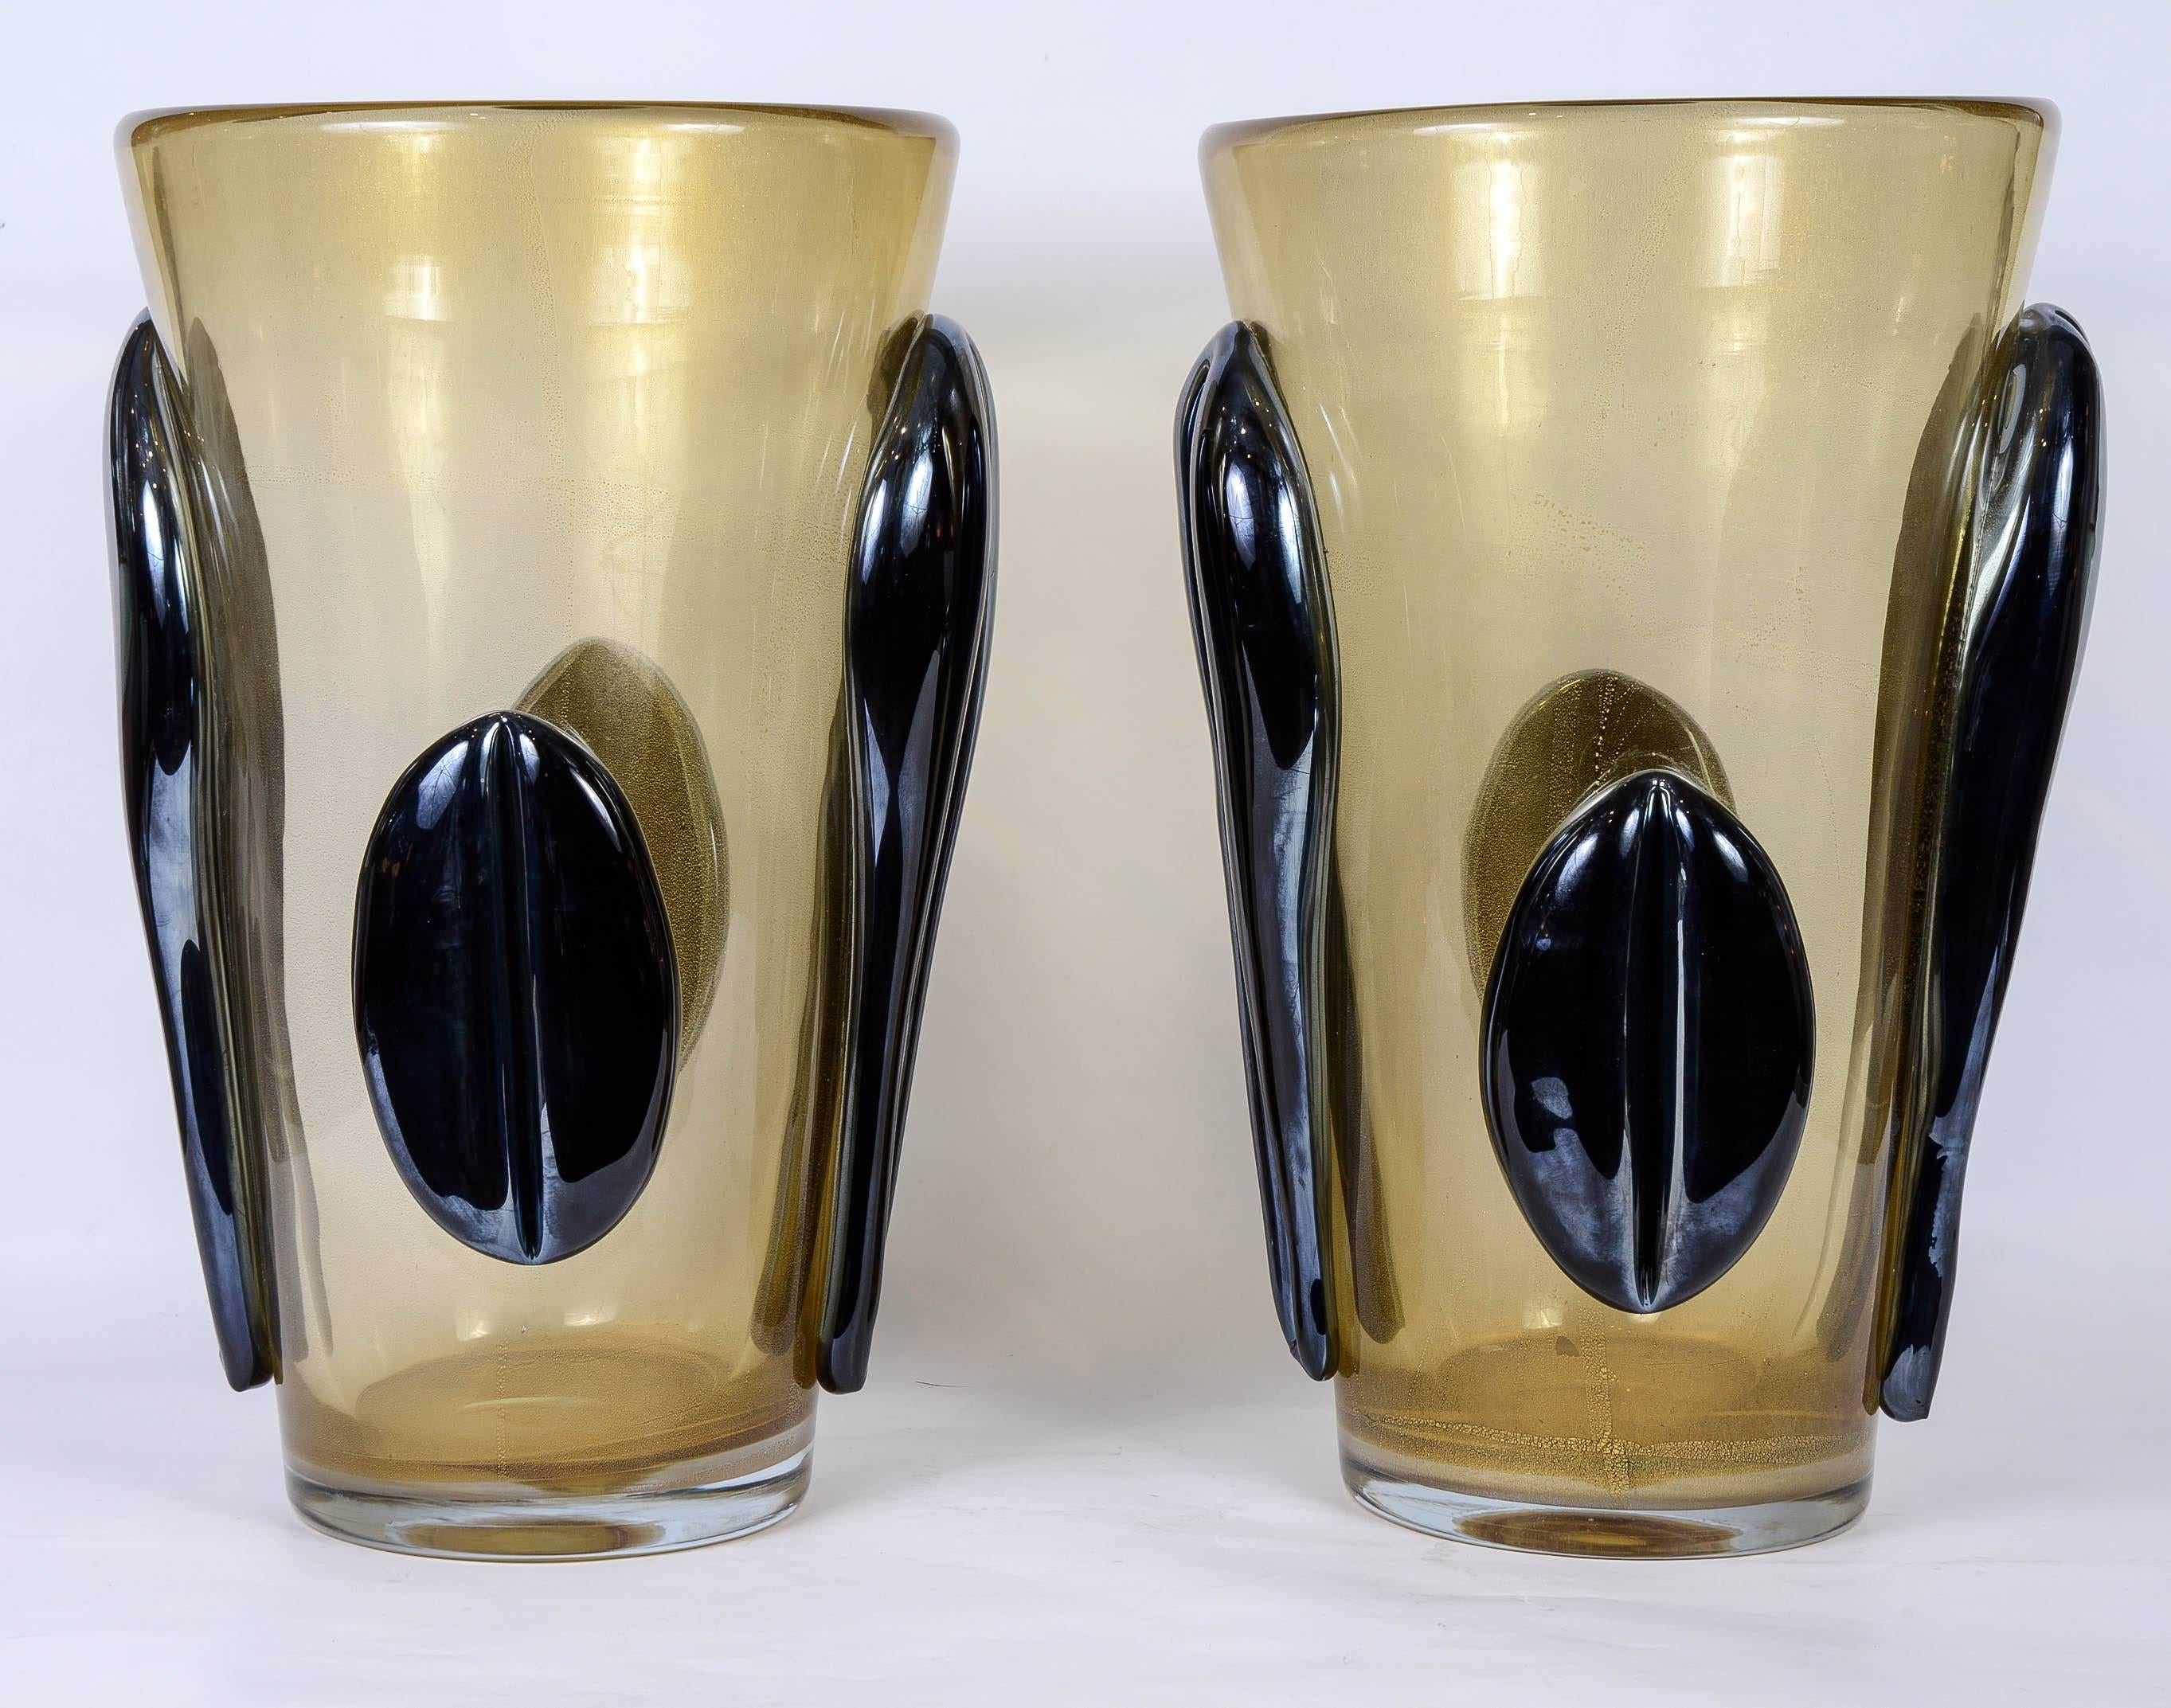 Pair of vases in Murano glass signed by G. Ferro.